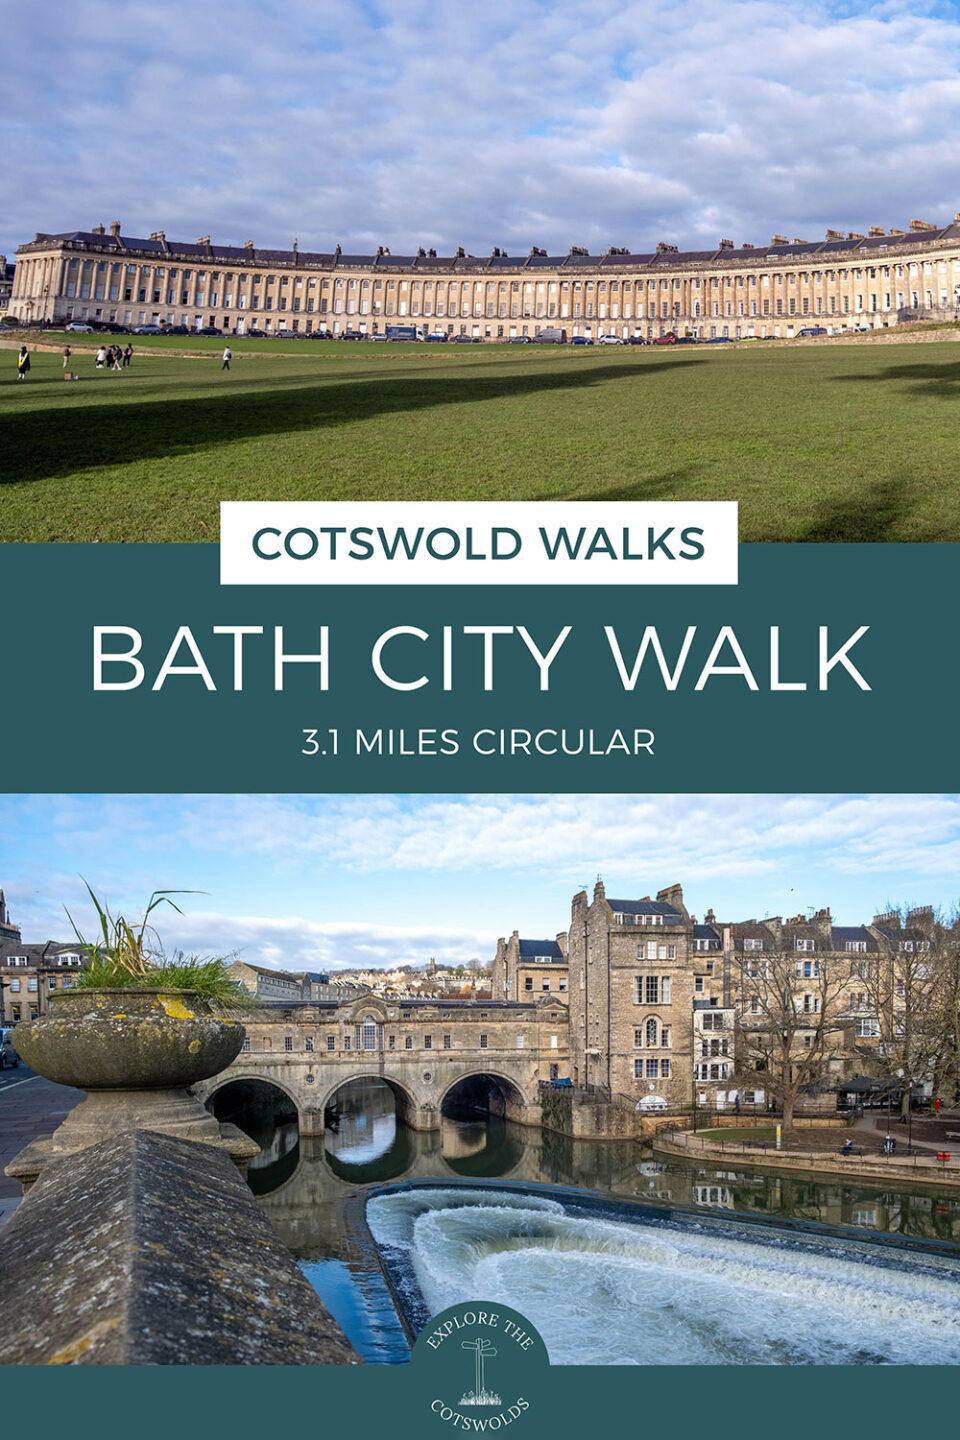 Map and guide for a 3.1-mile/5km self-guided walking tour of Bath, including the Royal Crescent, Abbey, Pulteney Bridge and the Roman Baths | Bath self-guided walk | Bath walking tour | Historic Bath walk | Bath circular walk